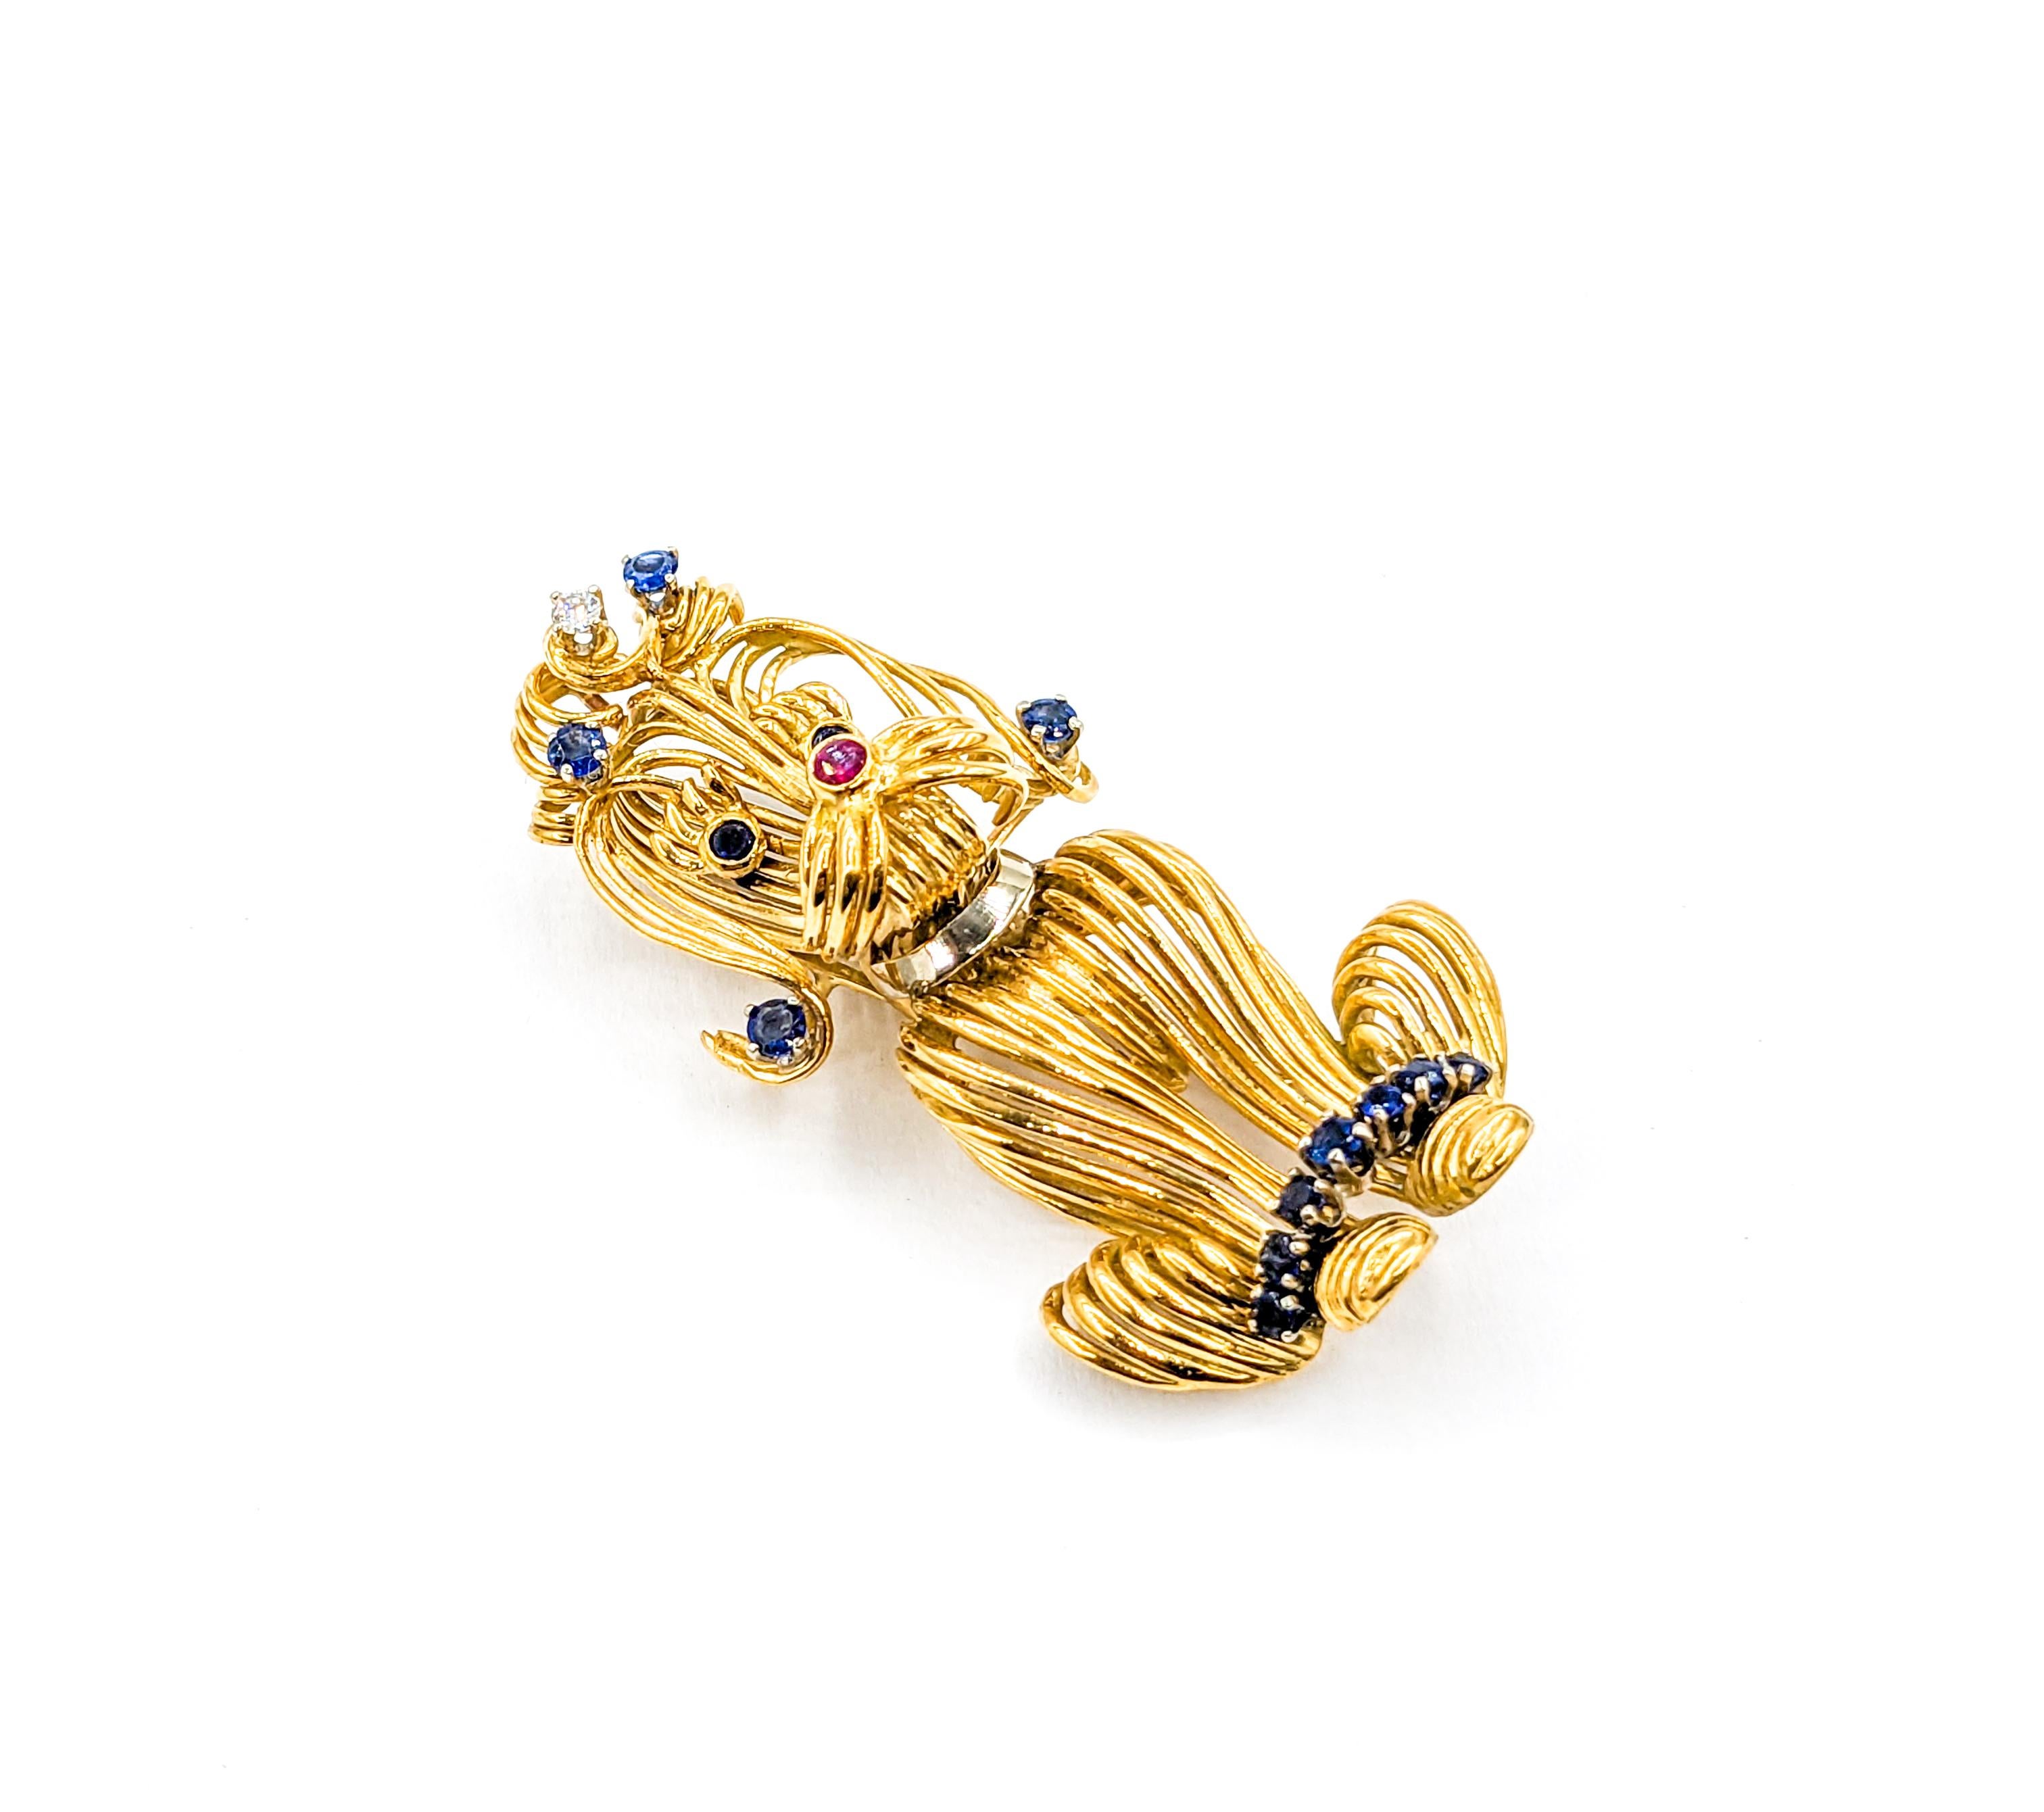 Women's Darling Mid-Century Poodle Dog Brooch with Sapphires, Ruby & Diamonds 18K For Sale